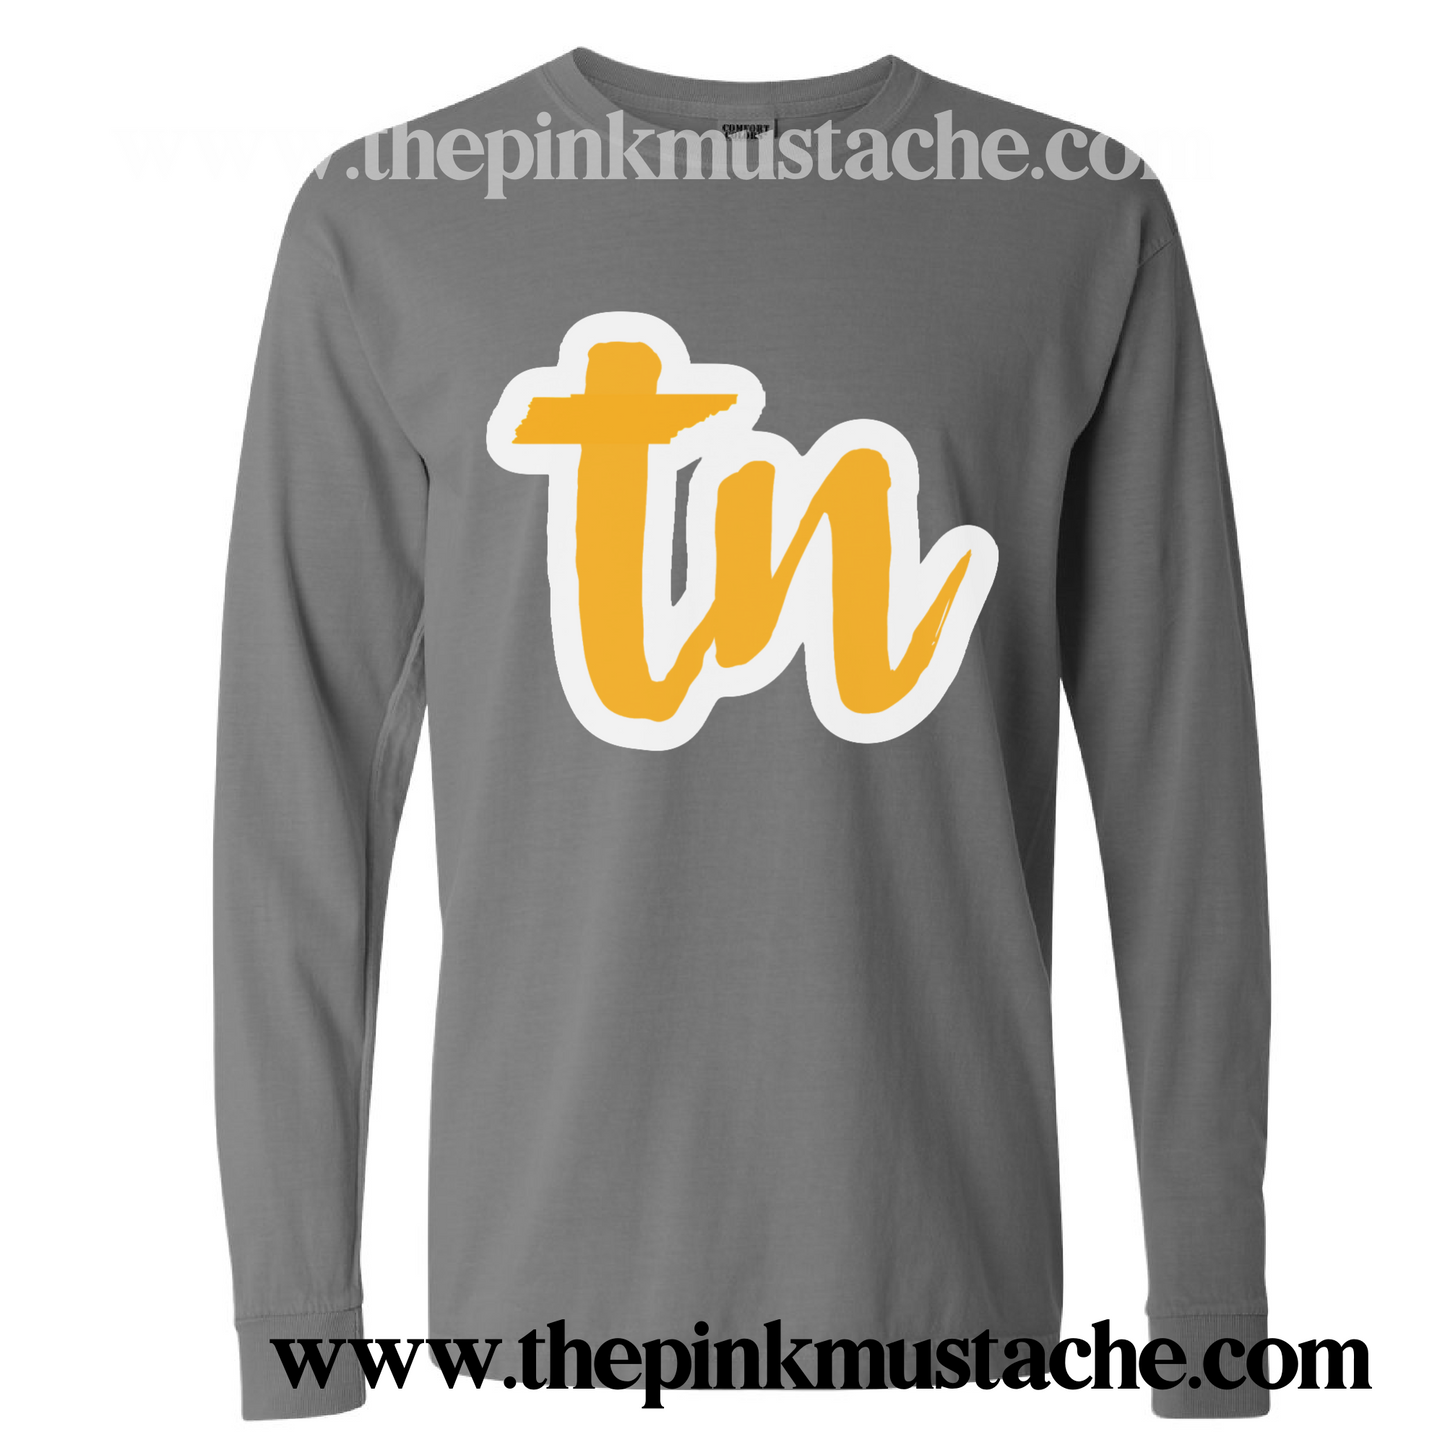 TN Tennessee Comfort Colors Long Sleeved Tee /Tennessee State Long Sleeve Shirt / TN Shirt